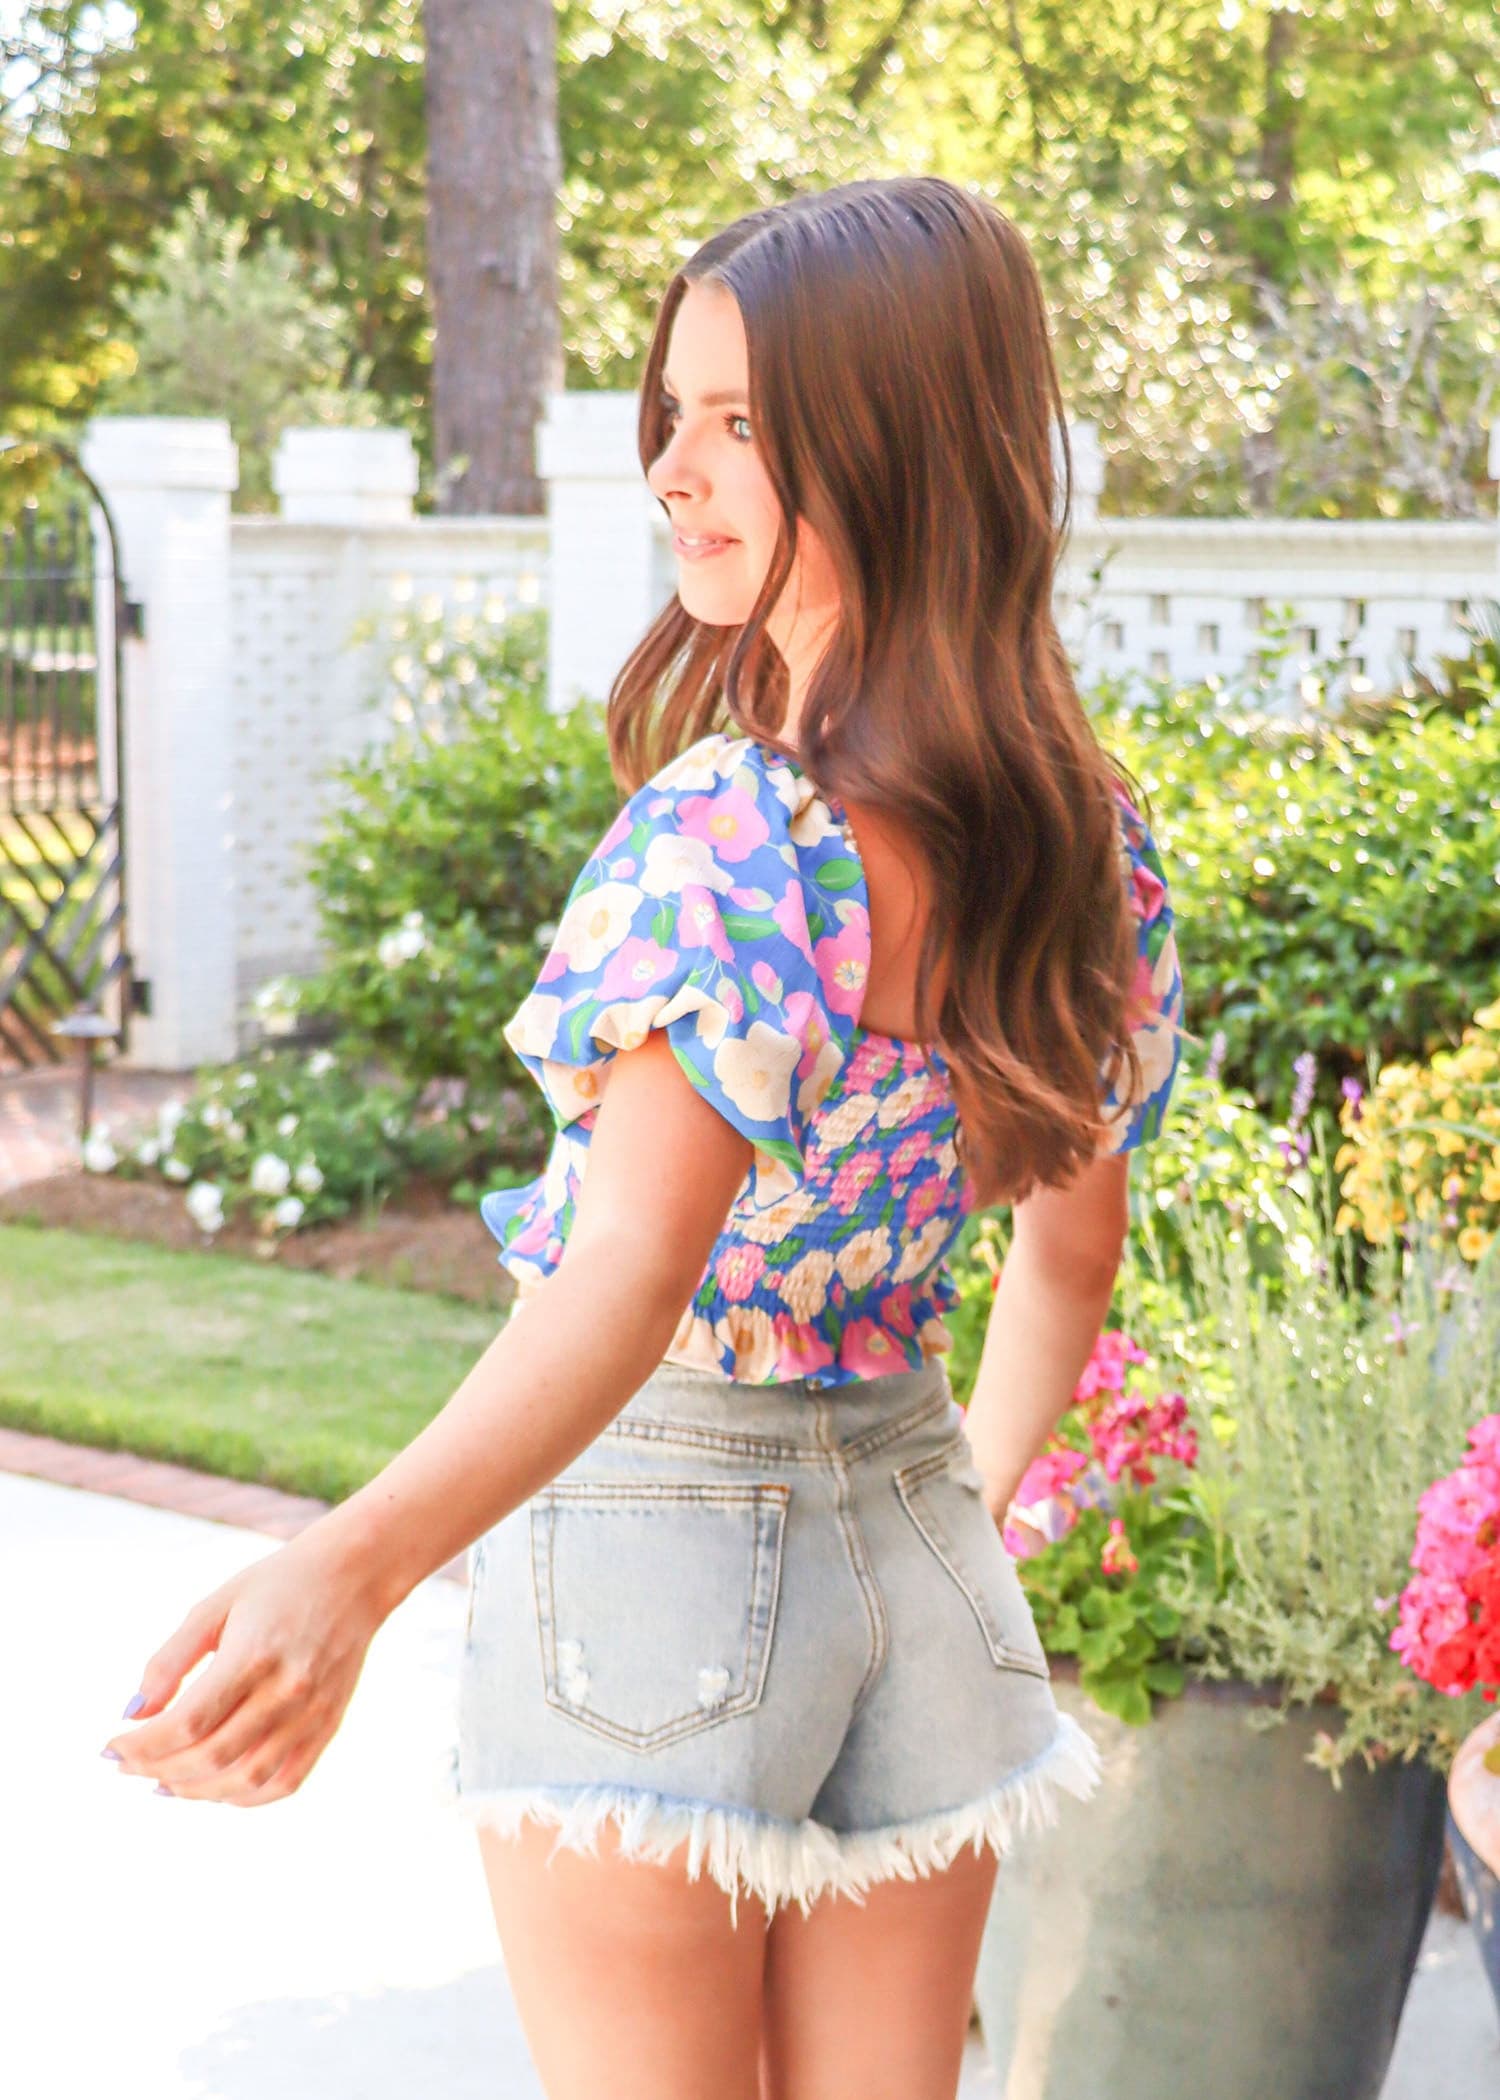 All For The Florals Top - Blue Multi Tops MerciGrace Boutique.